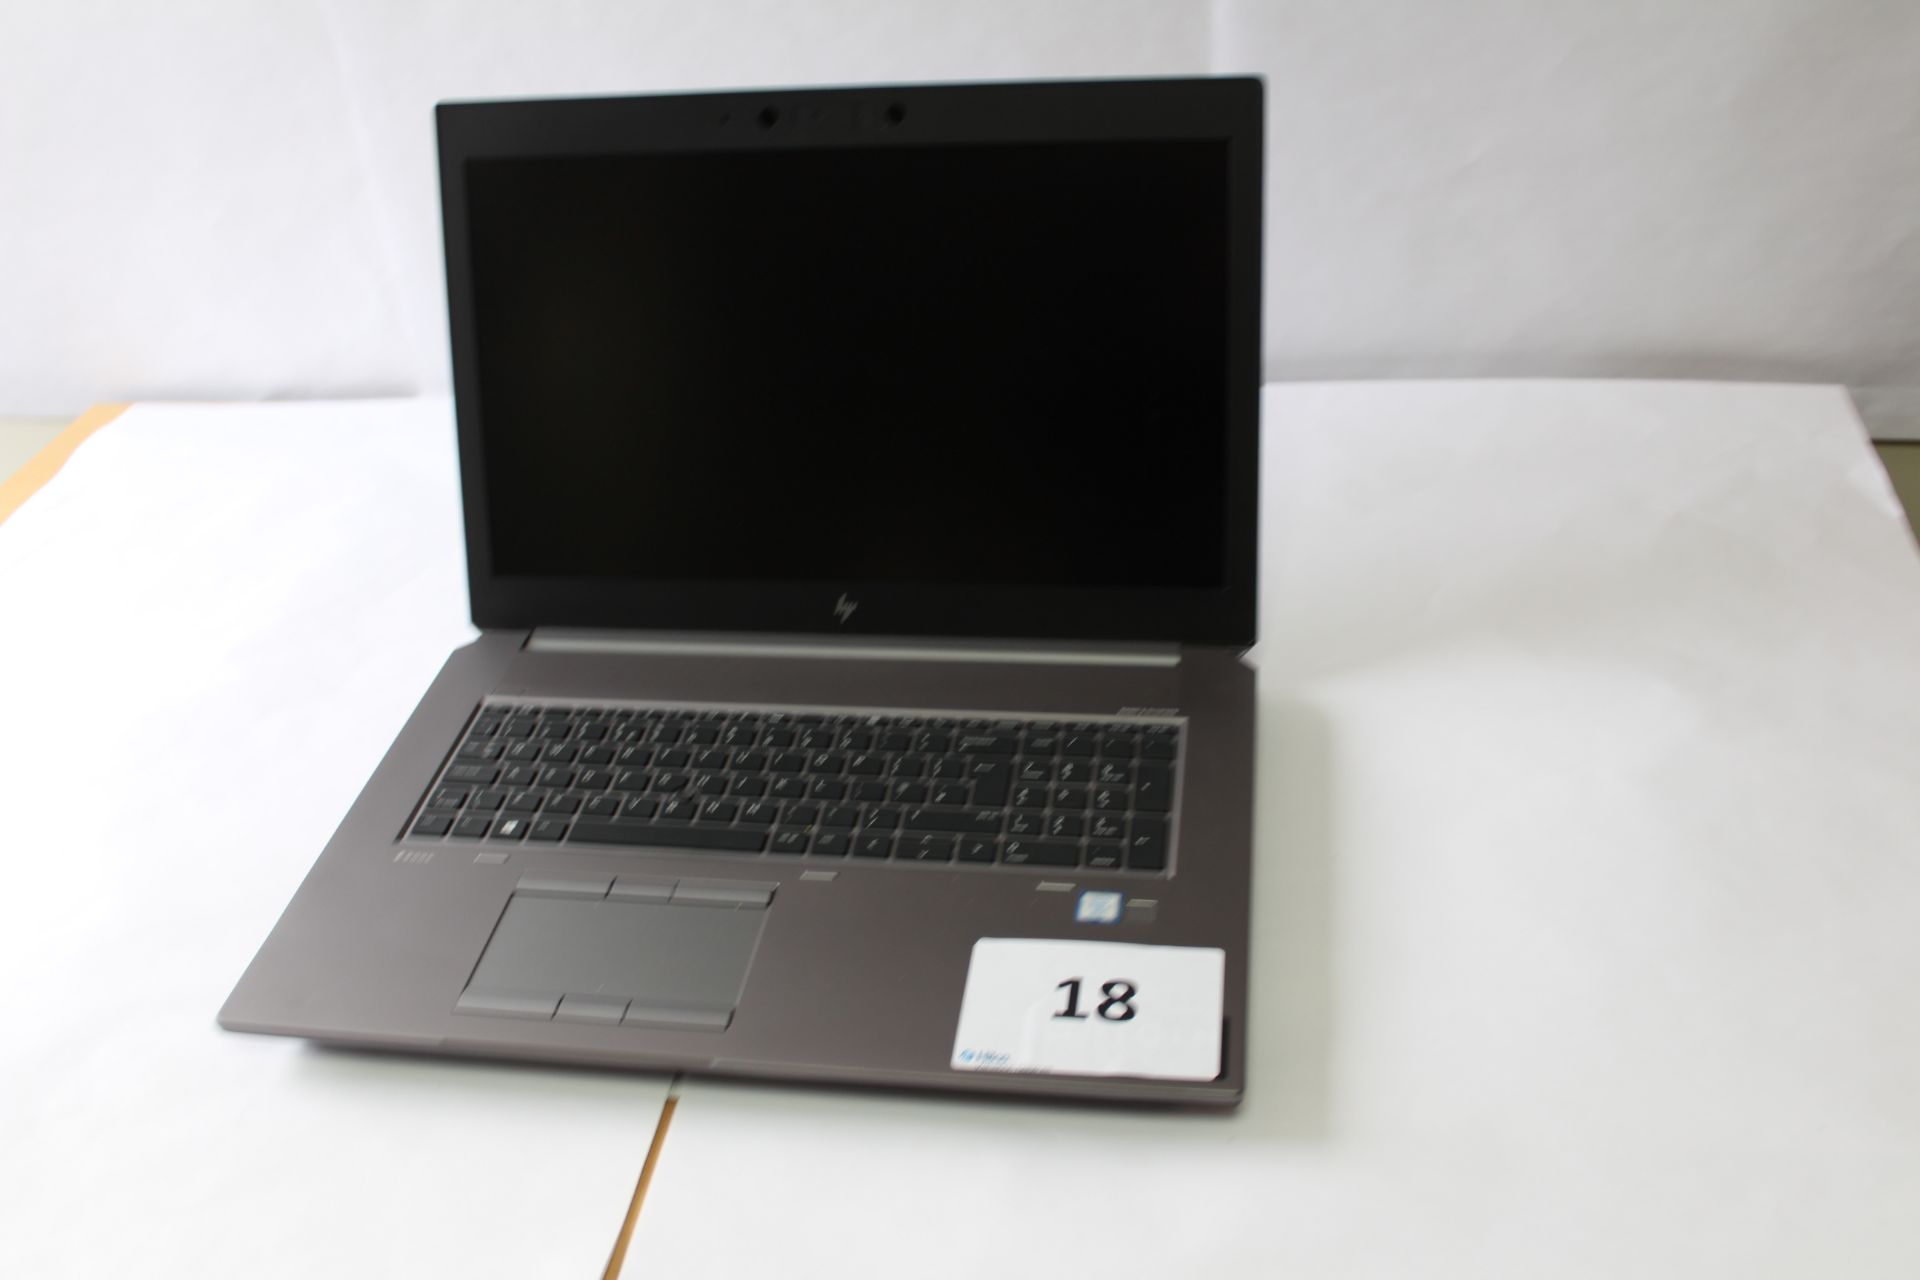 Hp Zbook 17 G6 Core i7 Laptop Computer